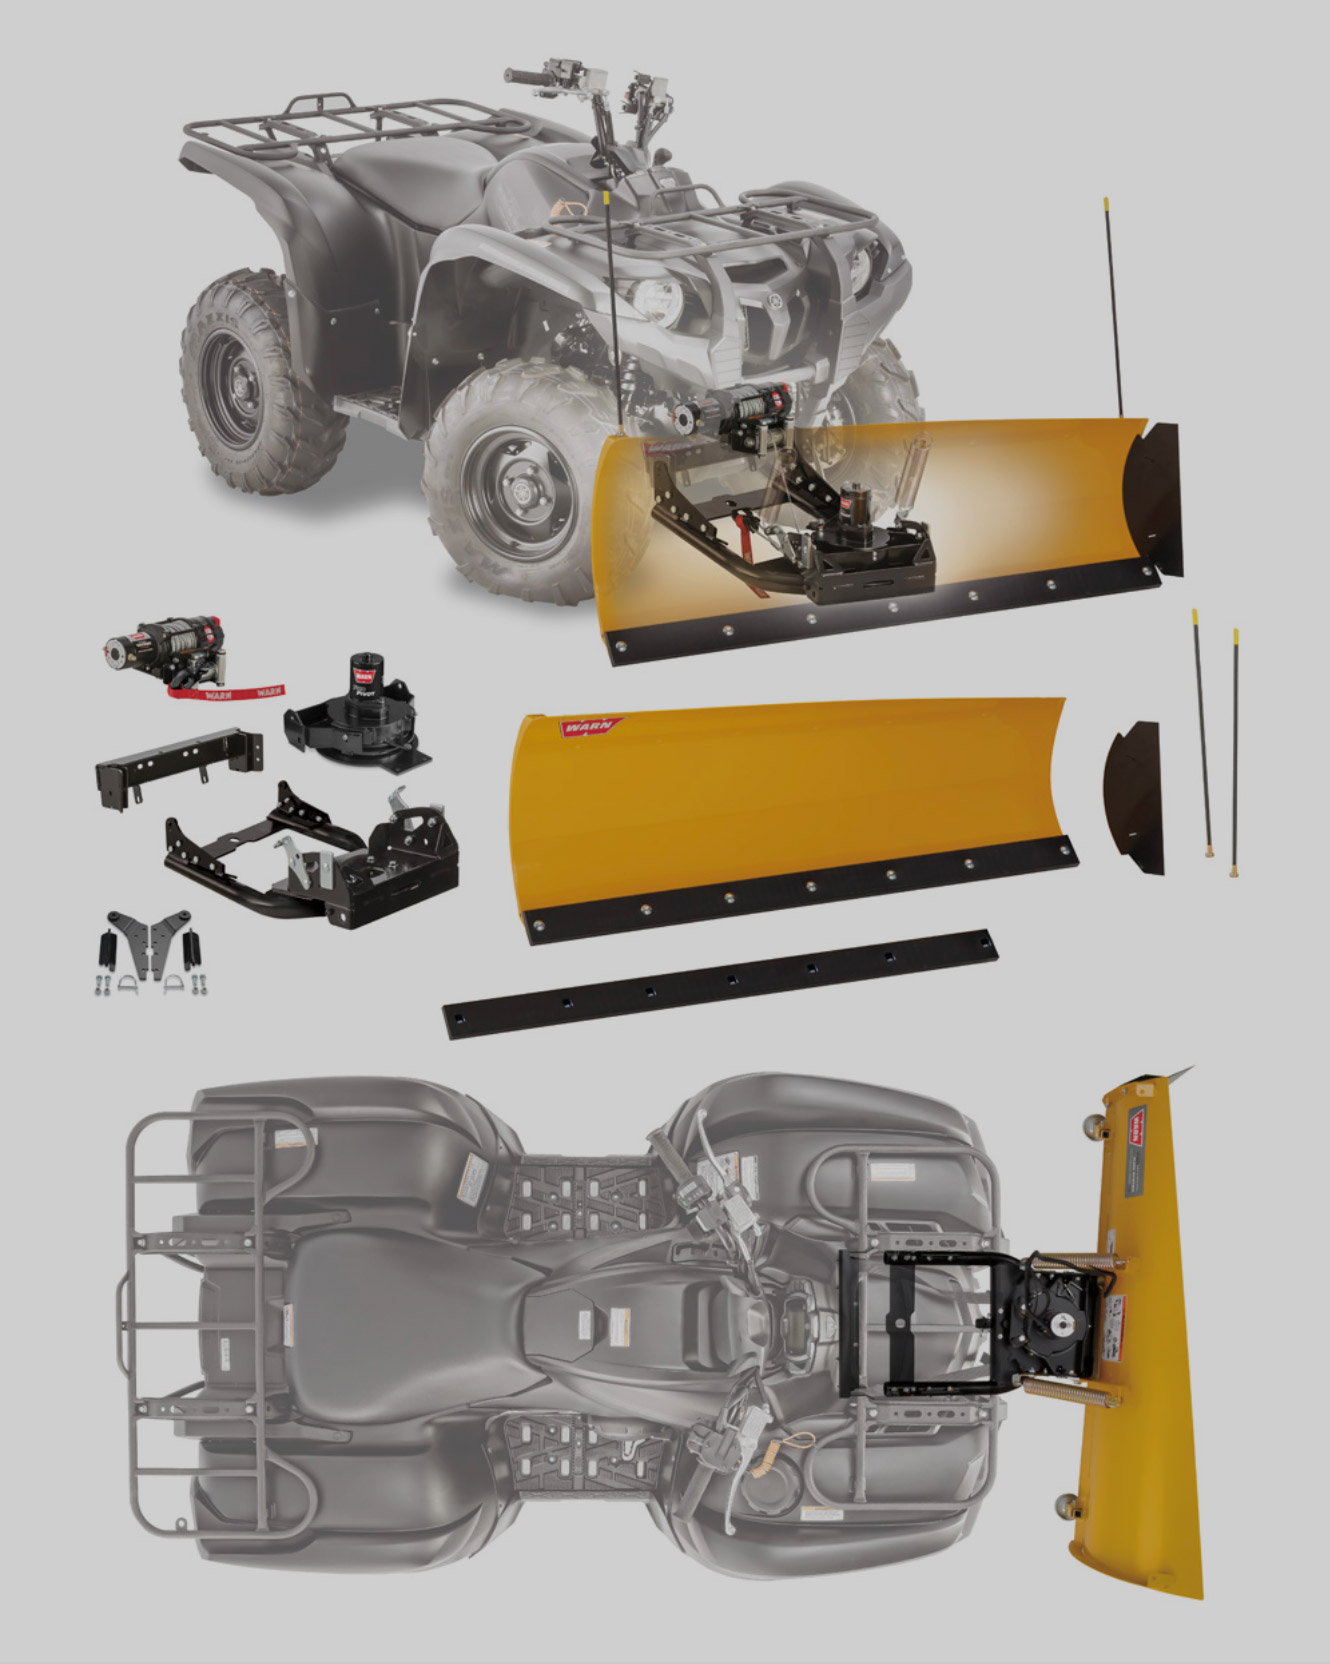 Warn Industries provides Rector with plow systems that can be mounted to trucks and off road vehicles